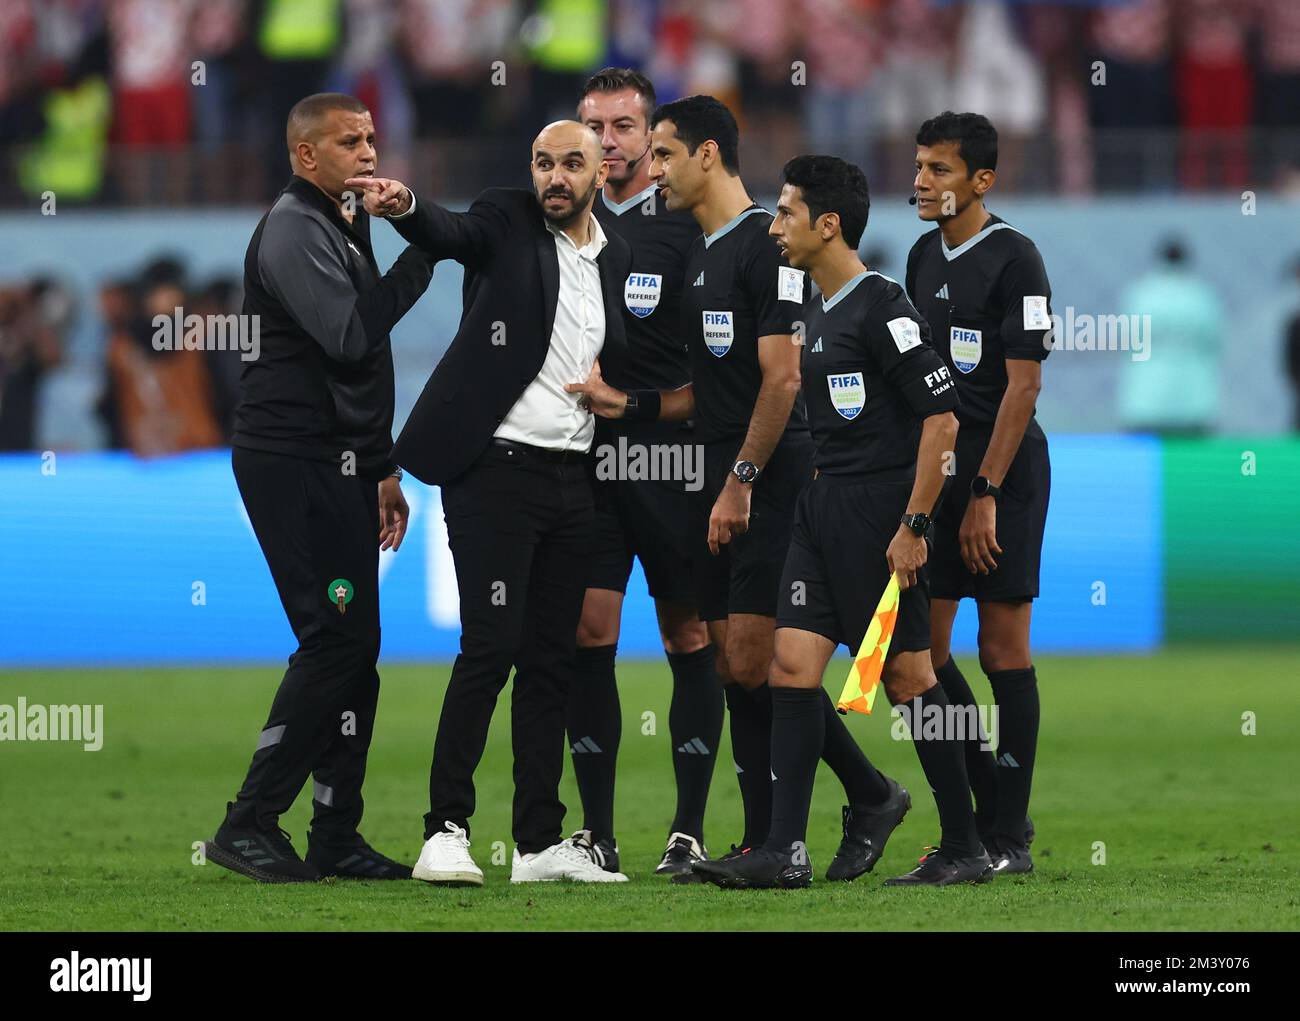 Doha, Qatar. 17th Dec, 2022. Walis Regragui coach of Morocco has words with referee Abdulrahman Al Jassim during the FIFA World Cup 2022 match at Khalifa International Stadium, Doha. Picture credit should read: David Klein/Sportimage Credit: Sportimage/Alamy Live News Stock Photo